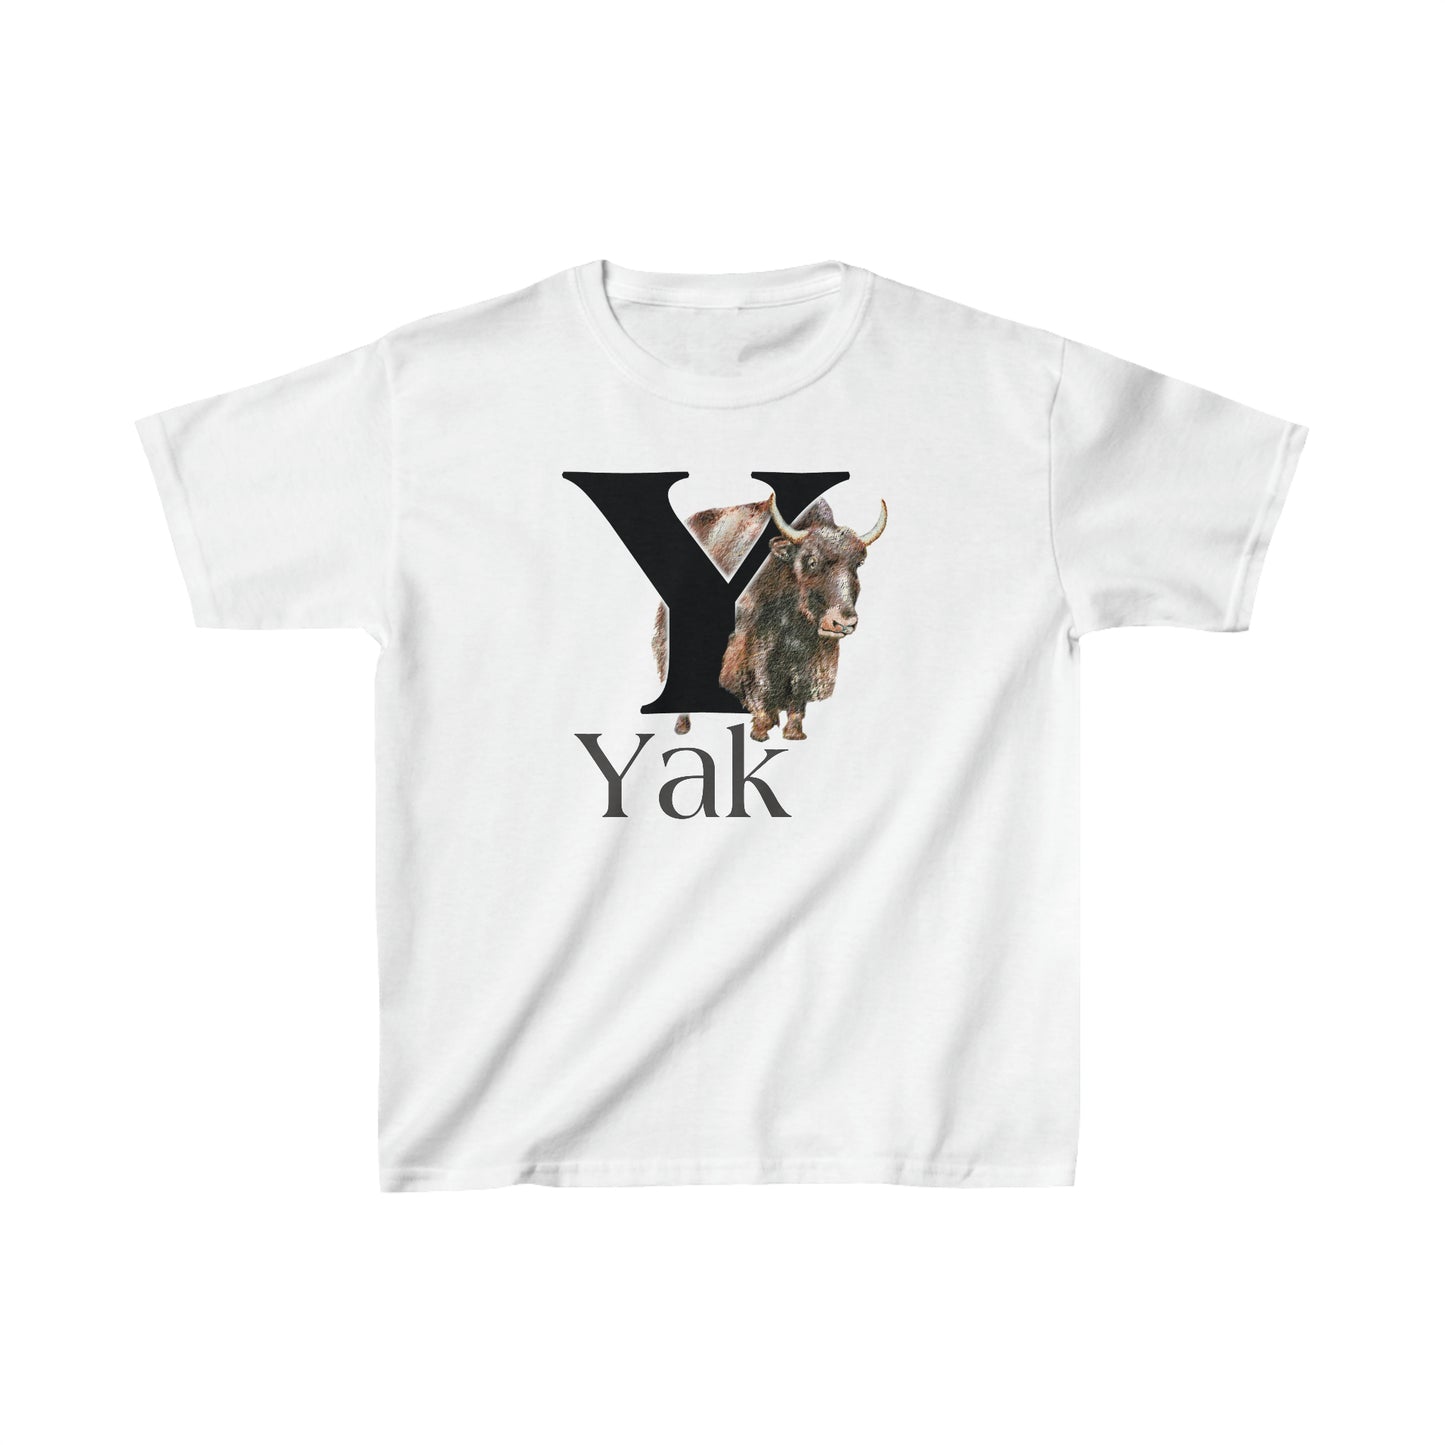 Y is for Yak T-shirt. Yak Drawing T-Shirt, Yak on shirt, Yak illustration, animal t-shirt, animal alphabet T, animal letters Tee